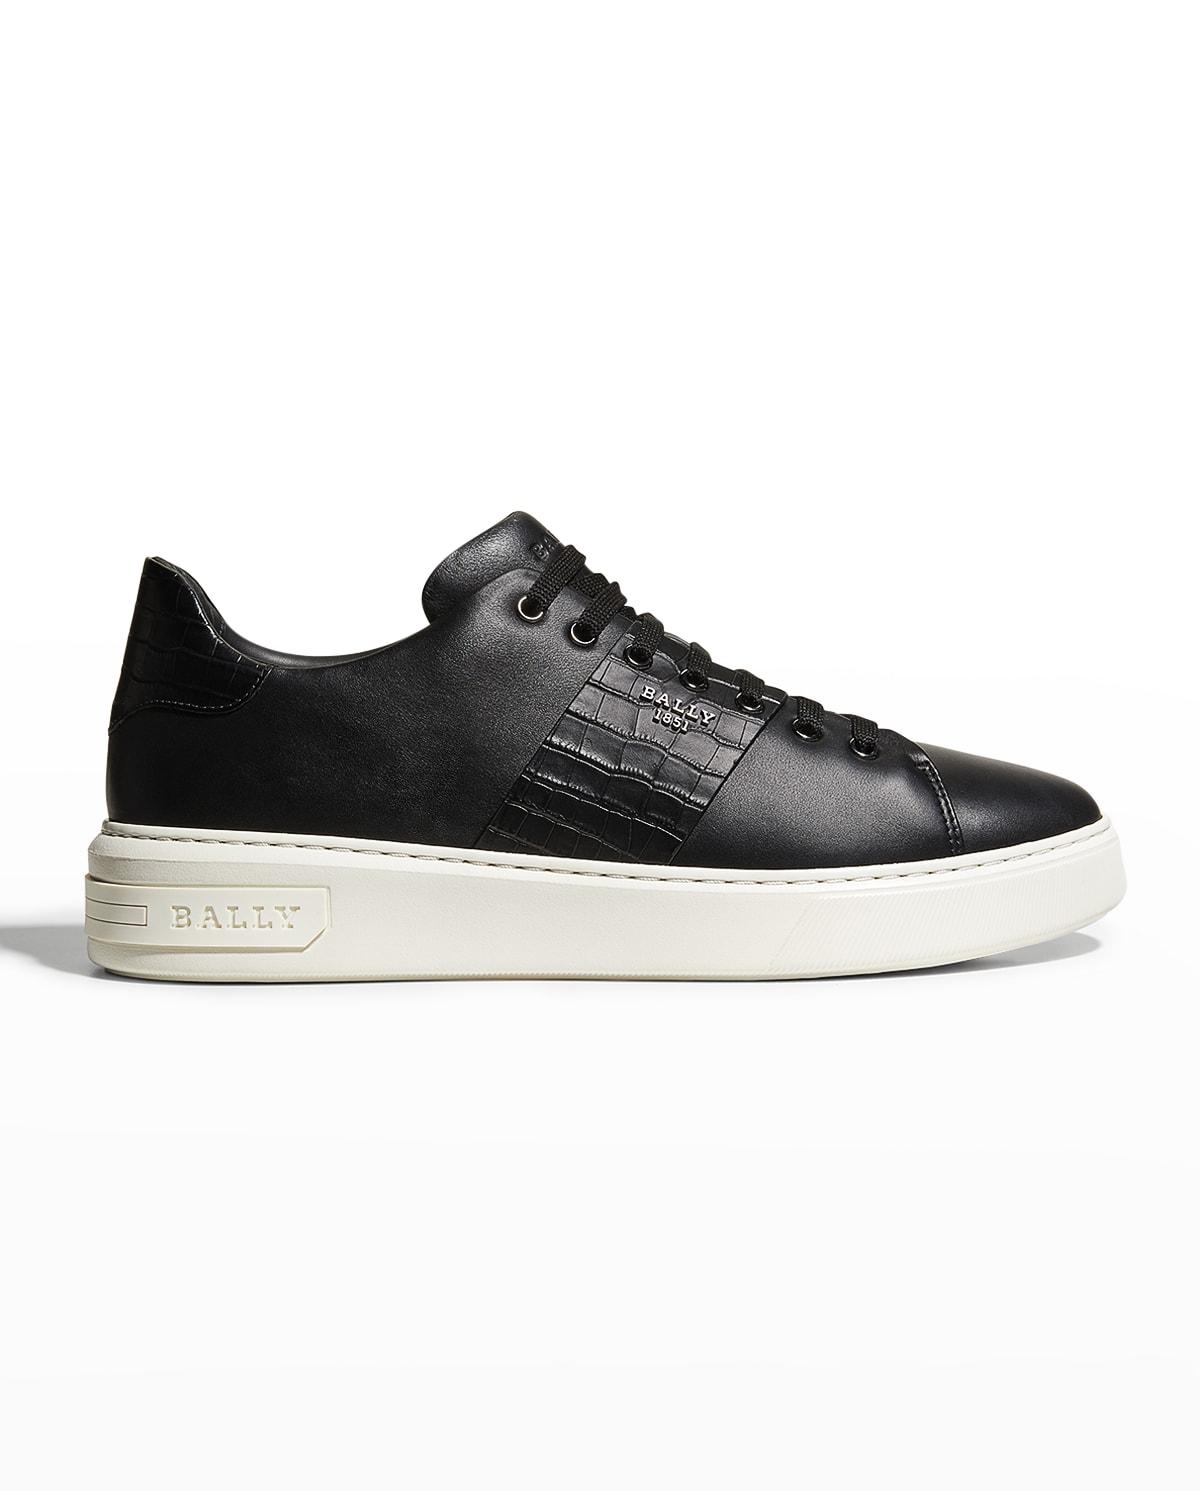 Women's Maxim Leather Sneakers by Bally | Coltorti Boutique